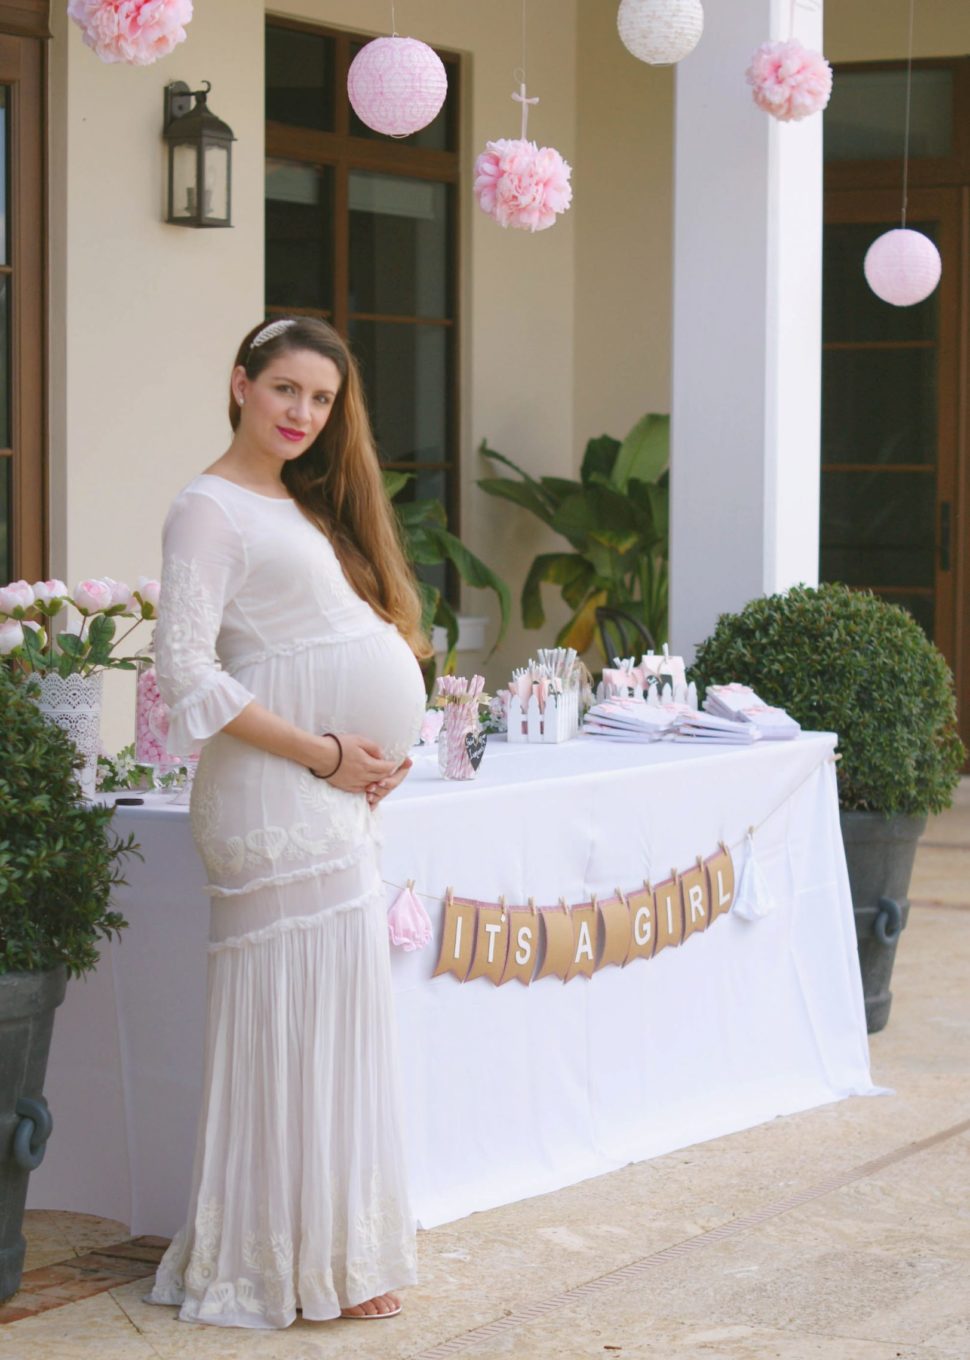 Medium Size of Baby Shower:baby Shower Dresses Trendy Affordable Maternity Clothes Inexpensive Maternity Clothes Maternity Dresses For Photoshoot Maternity Blouses For Baby Shower Plus Size Maternity Dresses For Baby Shower What Should I Wear To My Baby Shower Plus Size Maternity Clothes